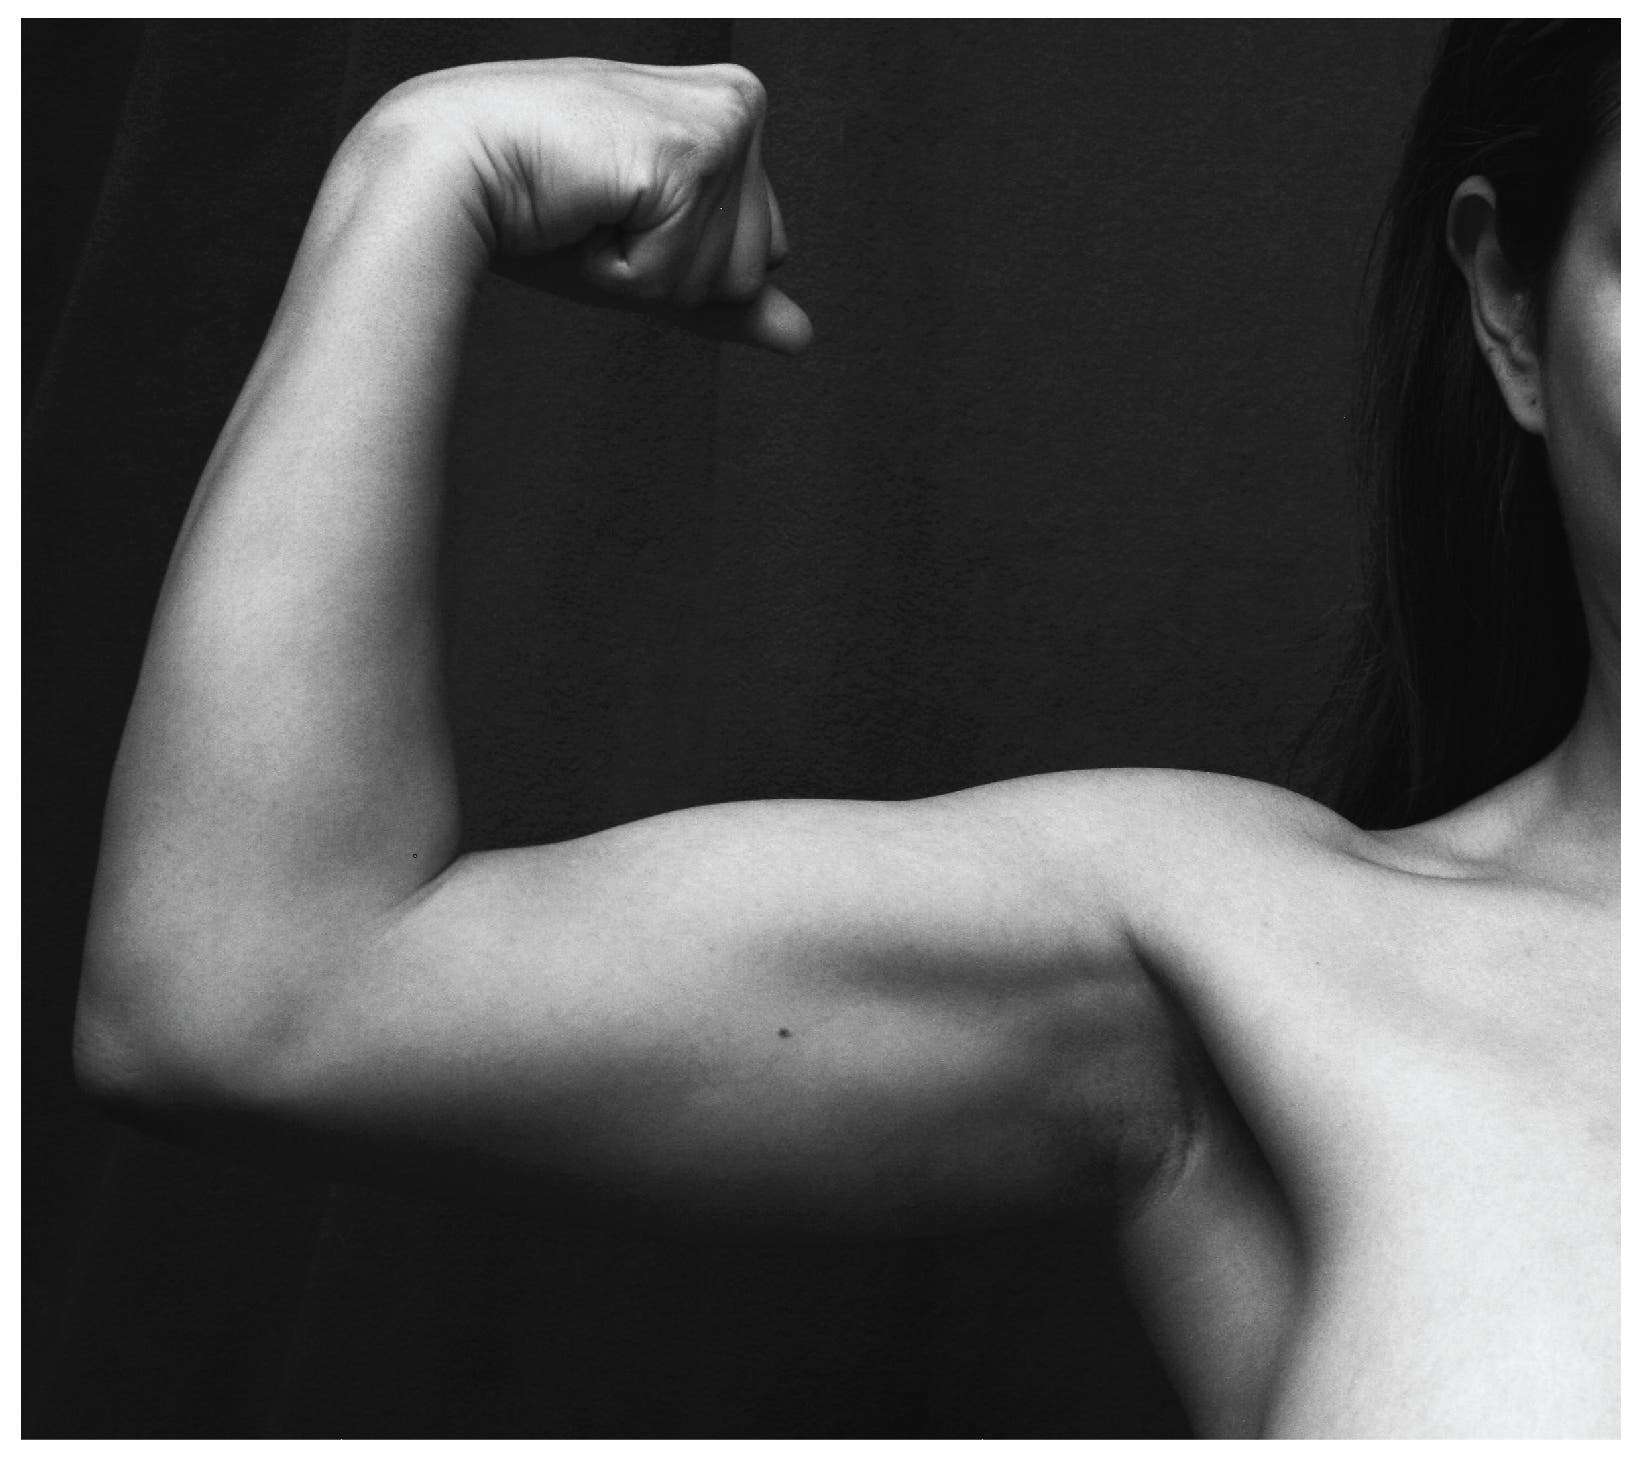 Prehistoric women had strong, bulky arms -- more powerful than today's  athletes